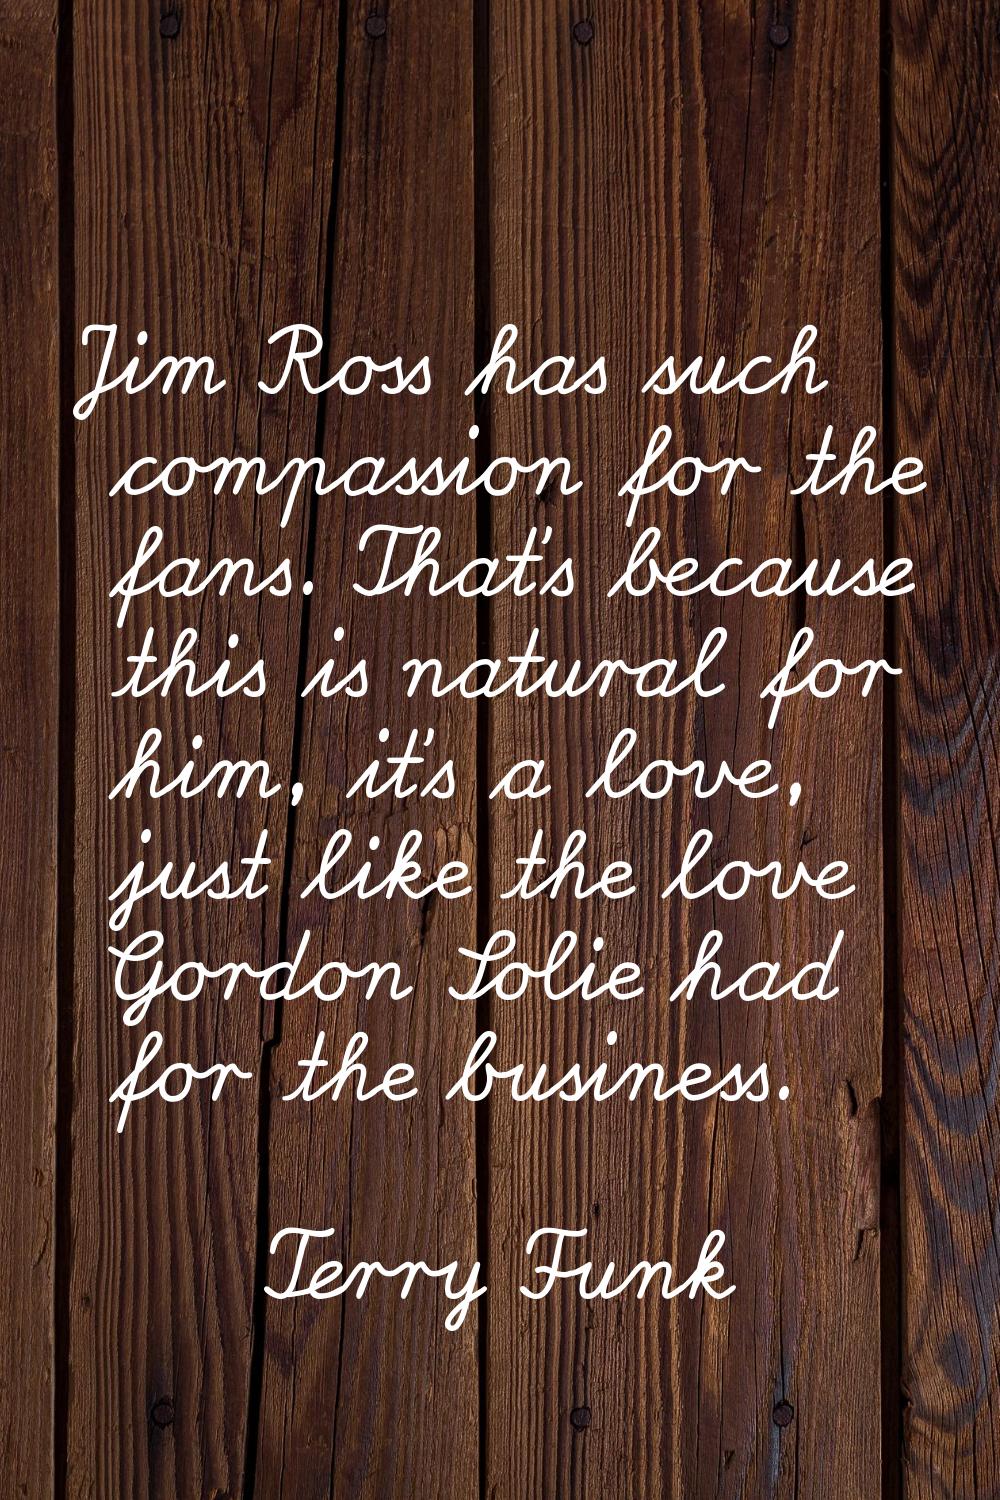 Jim Ross has such compassion for the fans. That's because this is natural for him, it's a love, jus